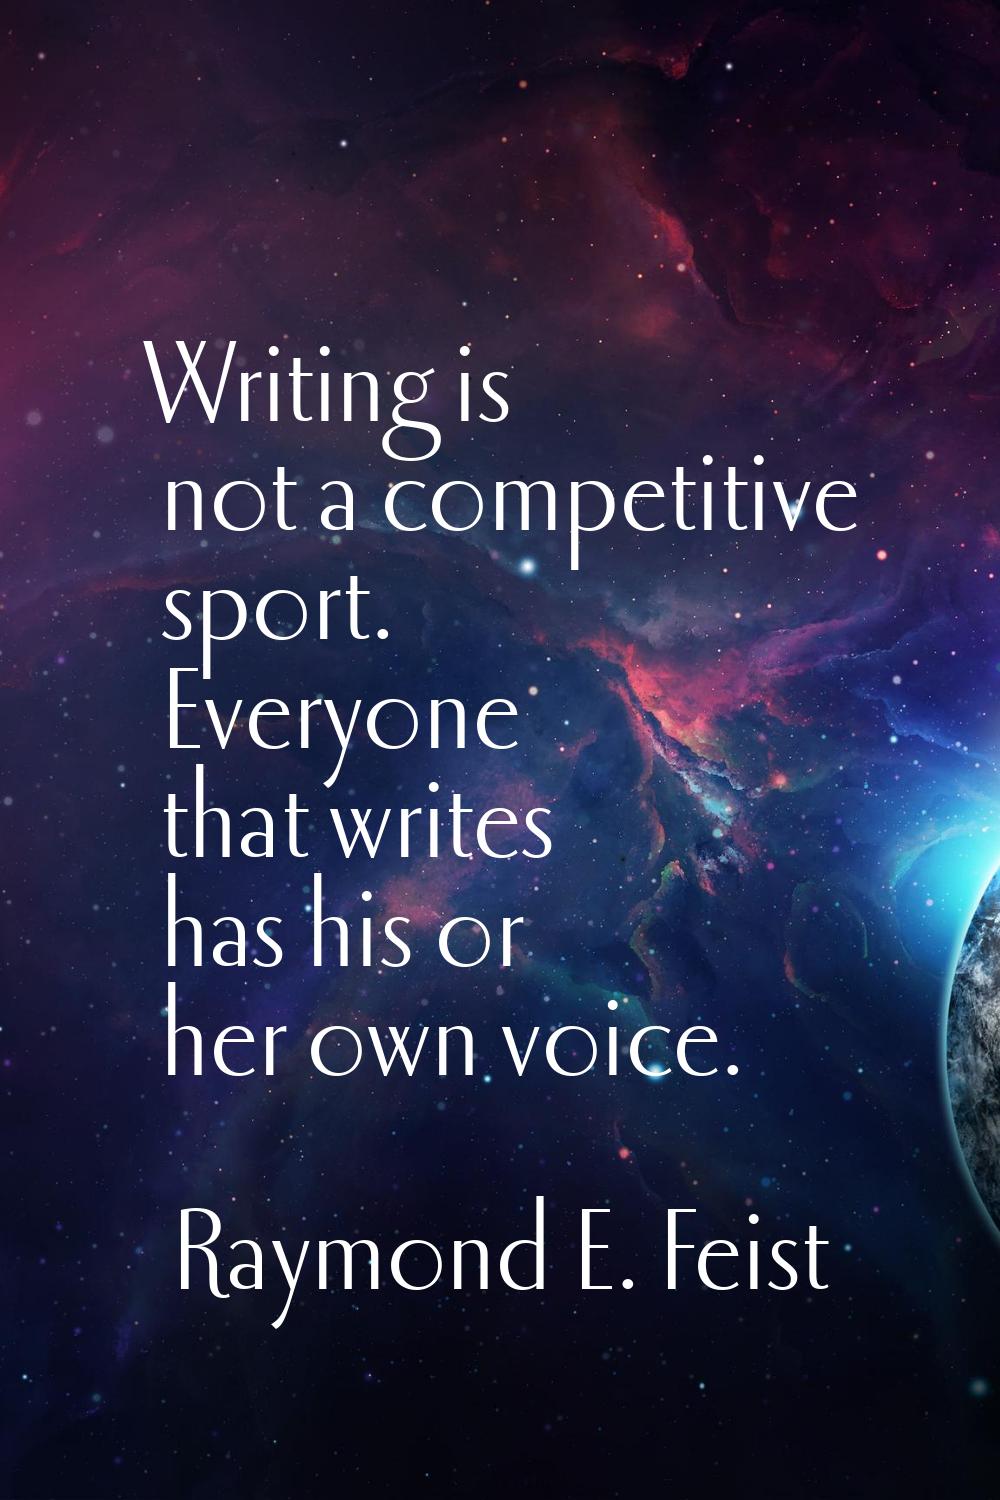 Writing is not a competitive sport. Everyone that writes has his or her own voice.